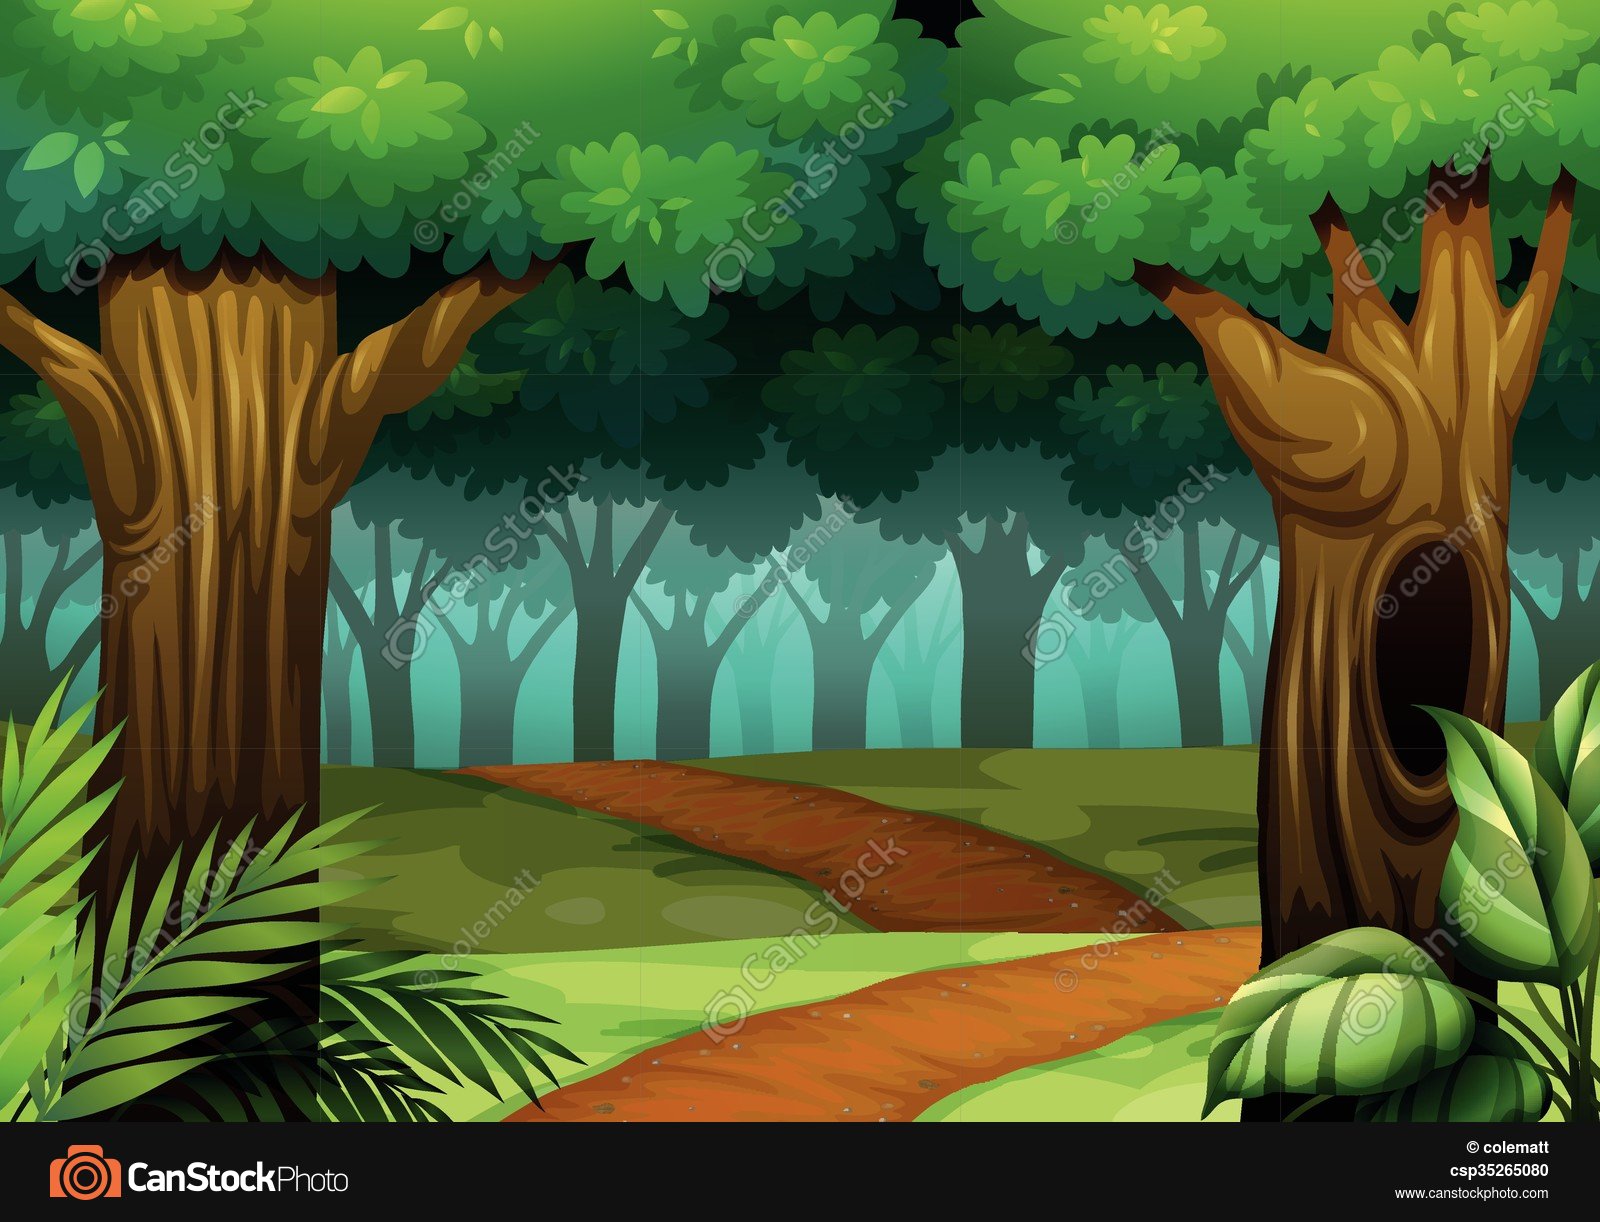 Forest scene with trail in the woods illustration vector - Search ...